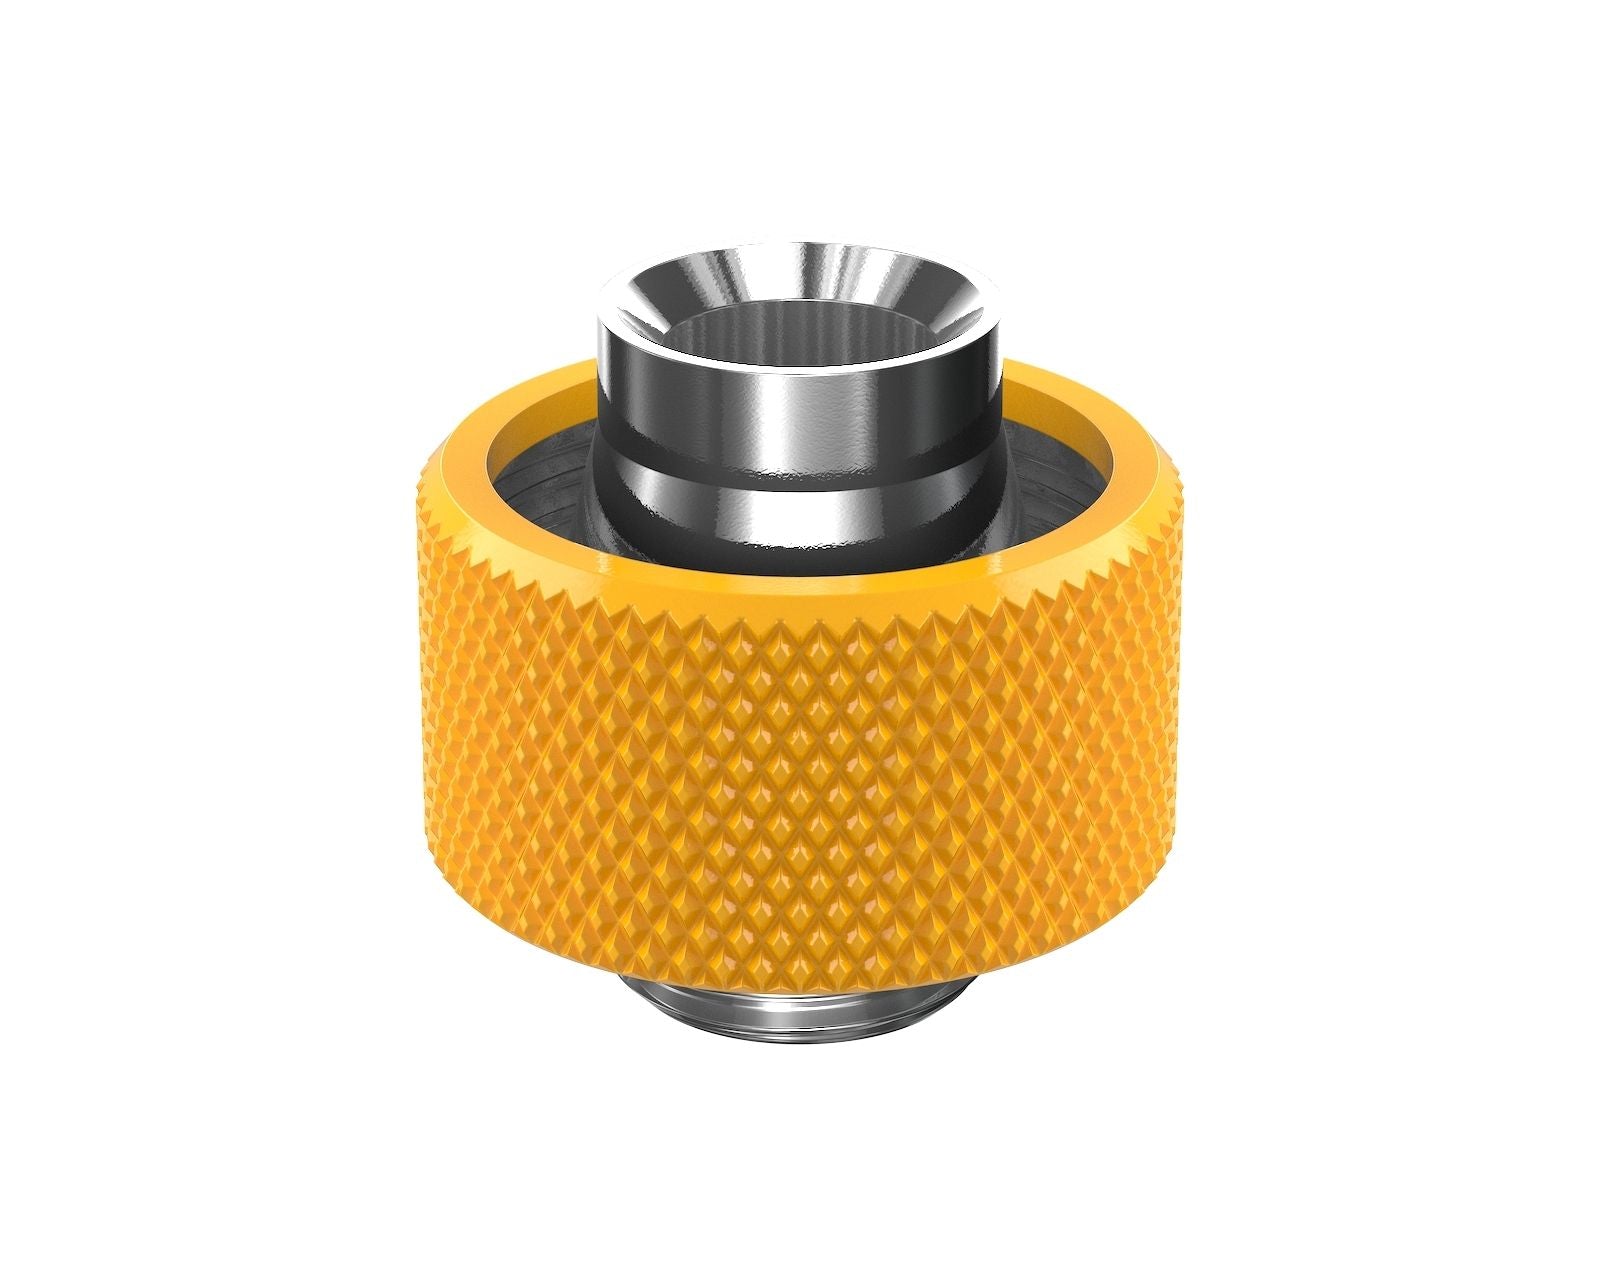 PrimoChill SecureFit SX - Premium Compression Fitting For 1/2in ID x 3/4in OD Flexible Tubing (F-SFSX34) - Available in 20+ Colors, Custom Watercooling Loop Ready - Yellow